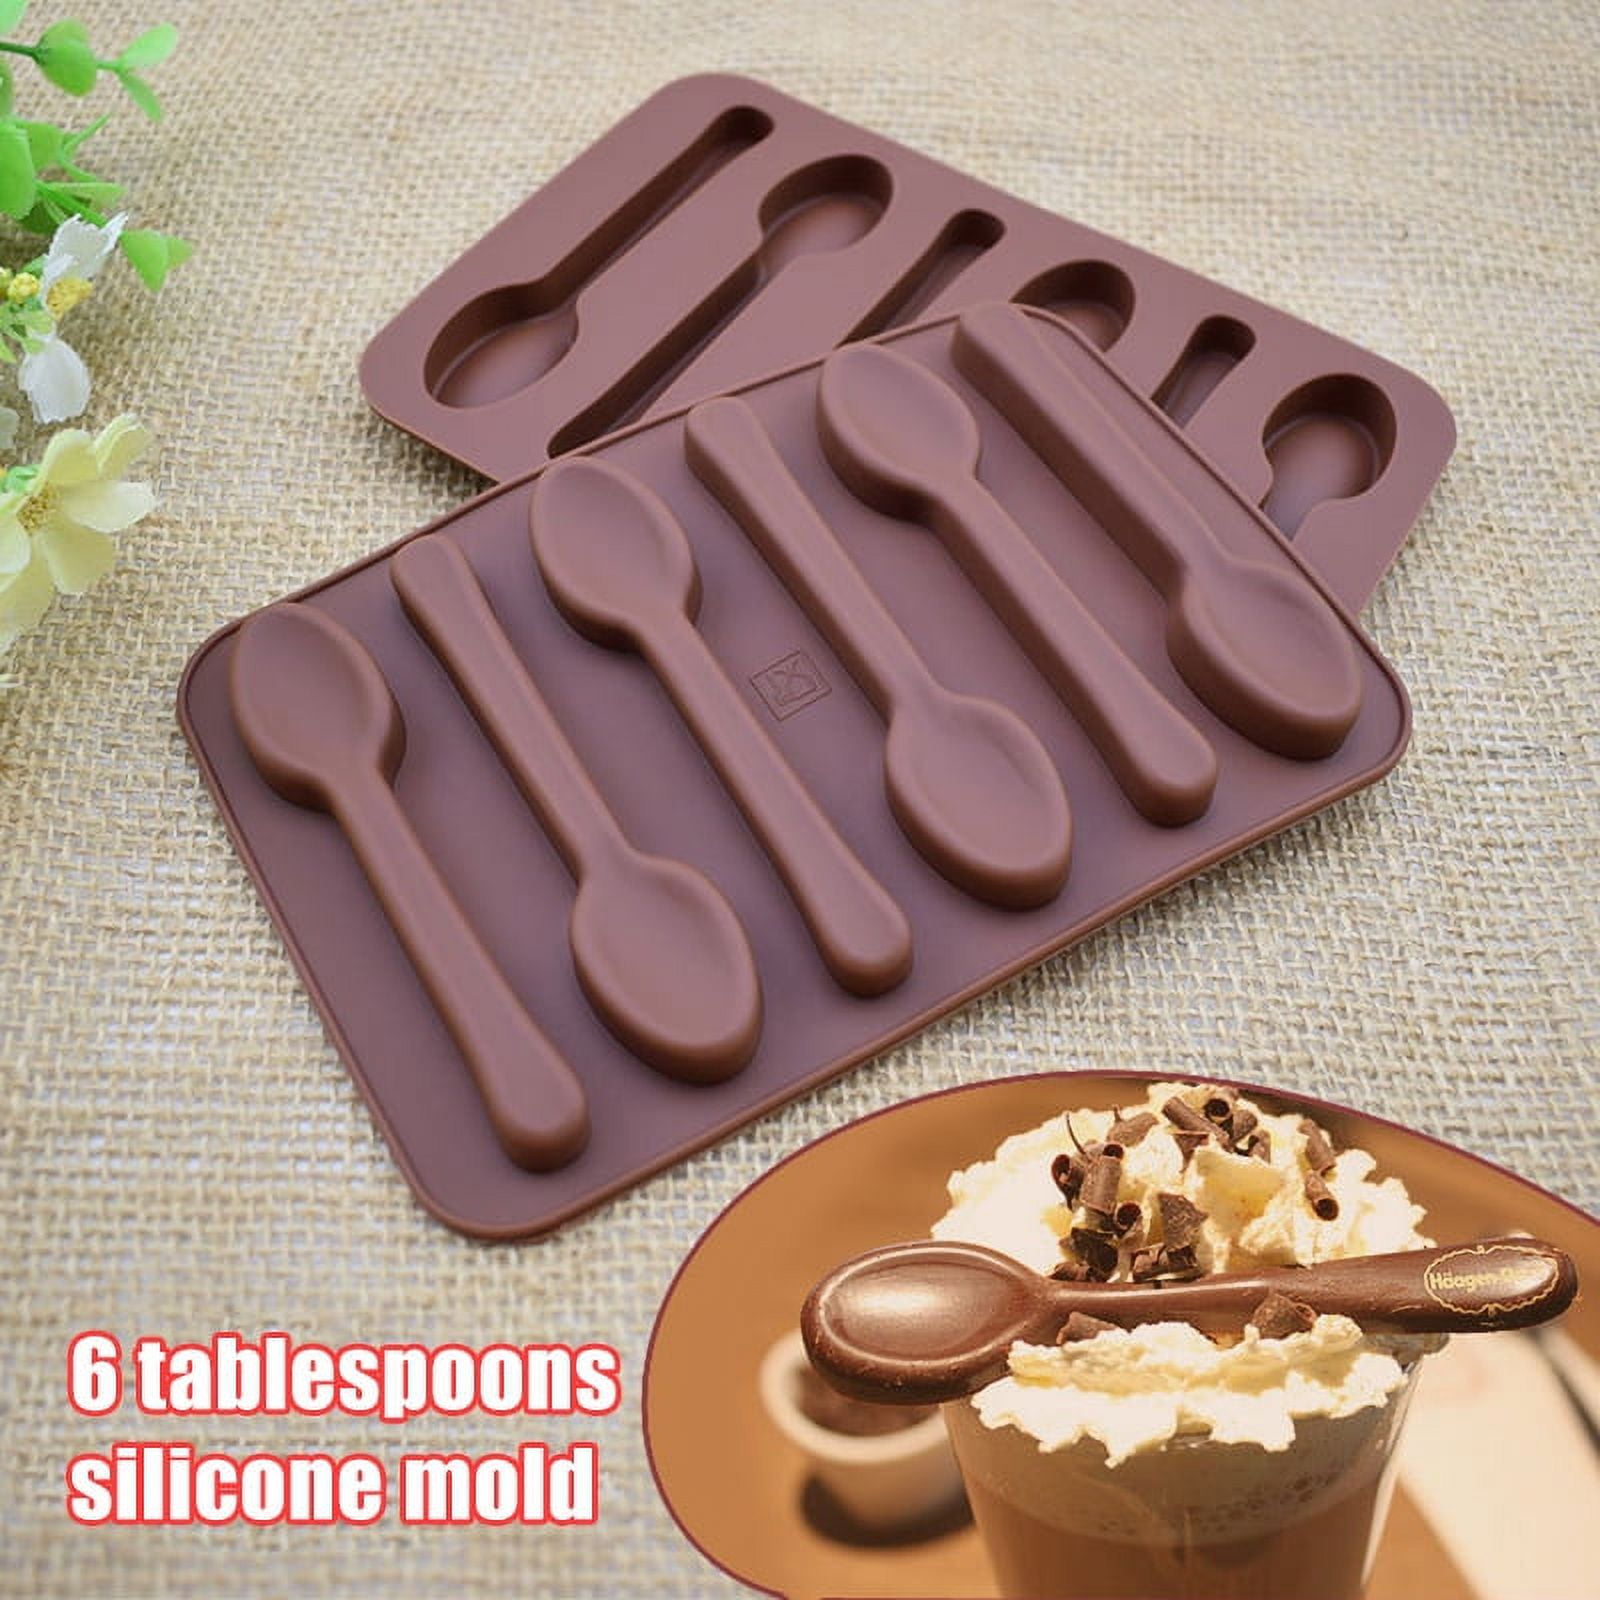 FASHION SILICONE MOULD FOR CAKE TOPPERS, CHOCOLATE